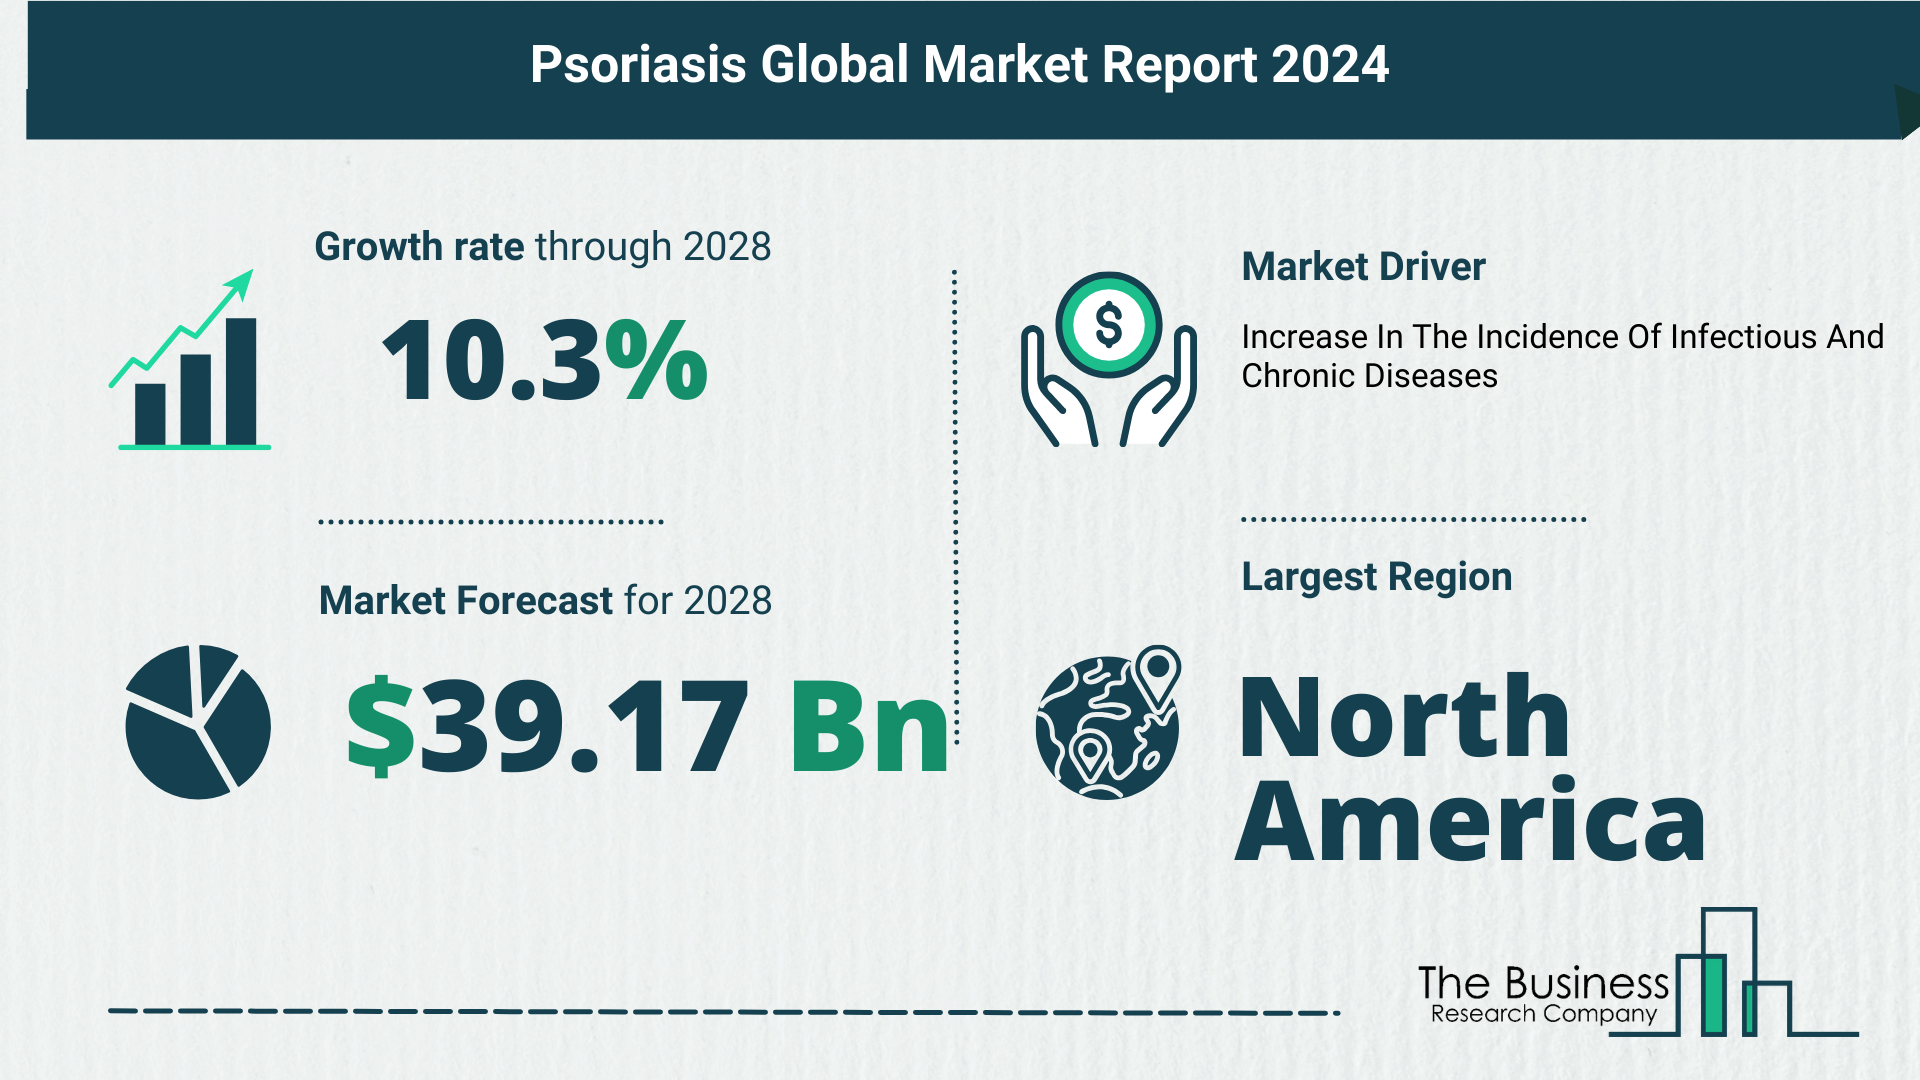 Key Insights On The Psoriasis Market 2024 – Size, Driver, And Major Players